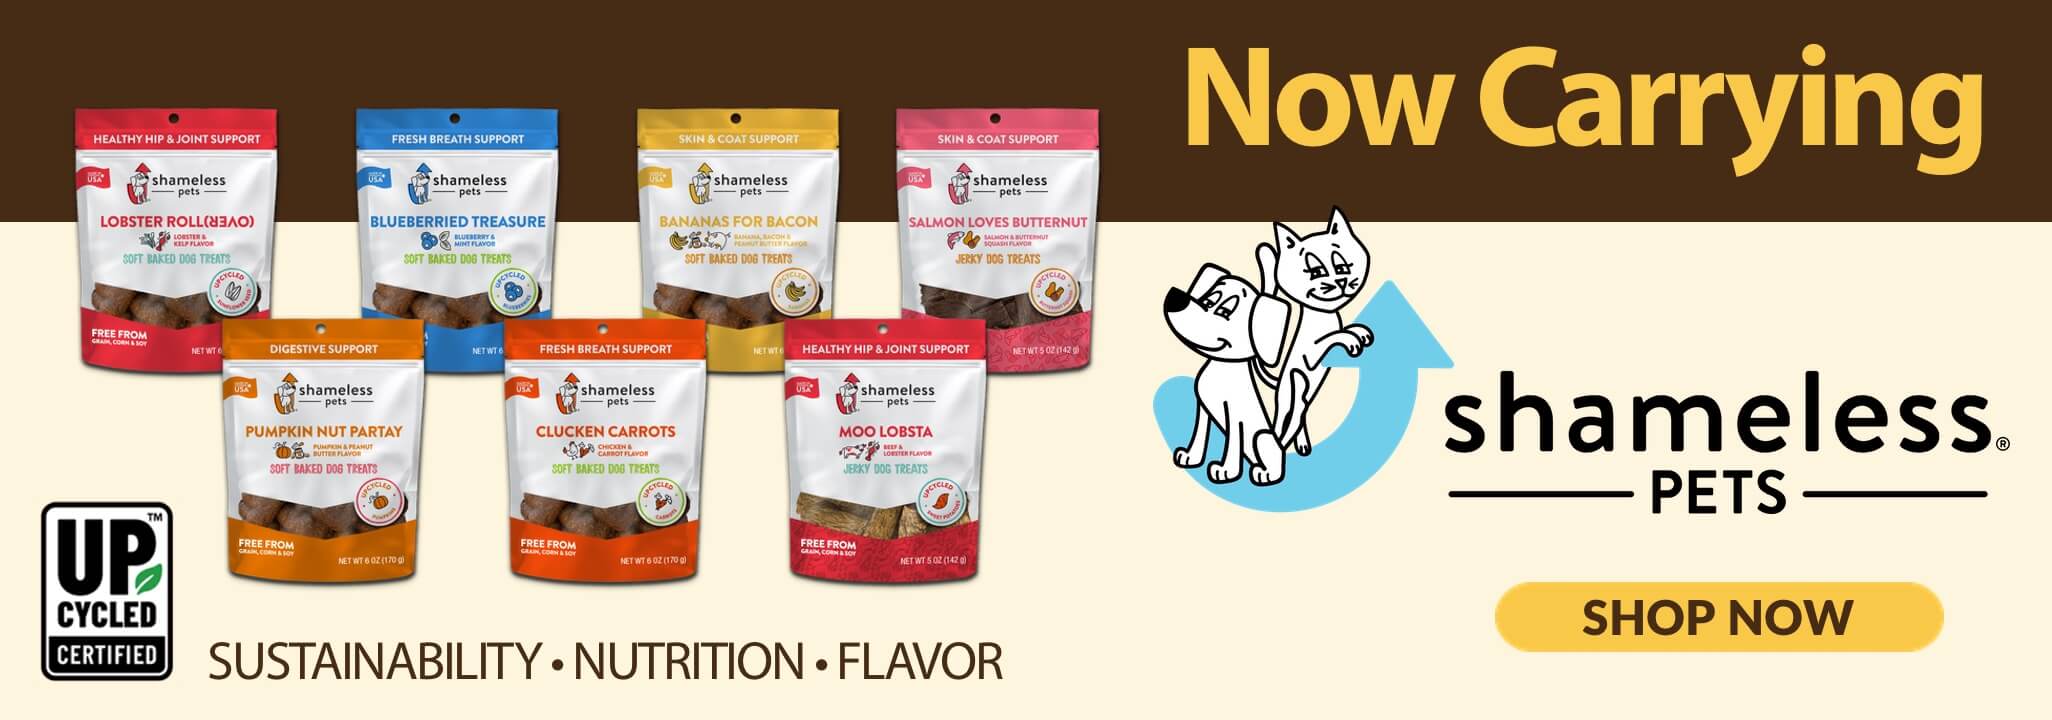 Now carrying Shameless Pet treats Upcycled Certified Sustainability Nutrition Flavor Shop Now